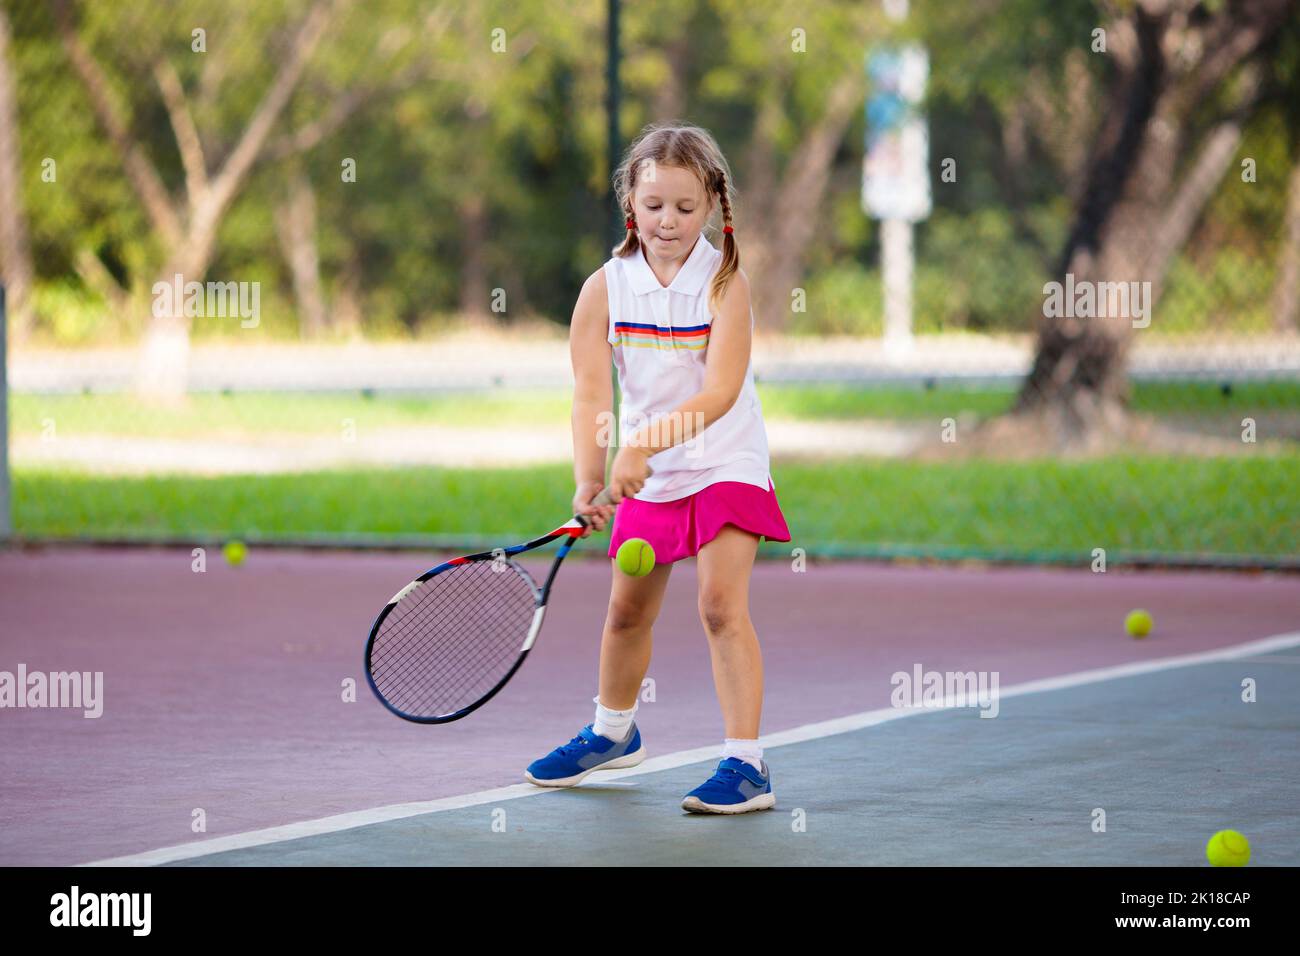 Child playing tennis on indoor court. Little girl with tennis racket and ball in sport club. Active exercise for kids. Summer activities for children. Stock Photo